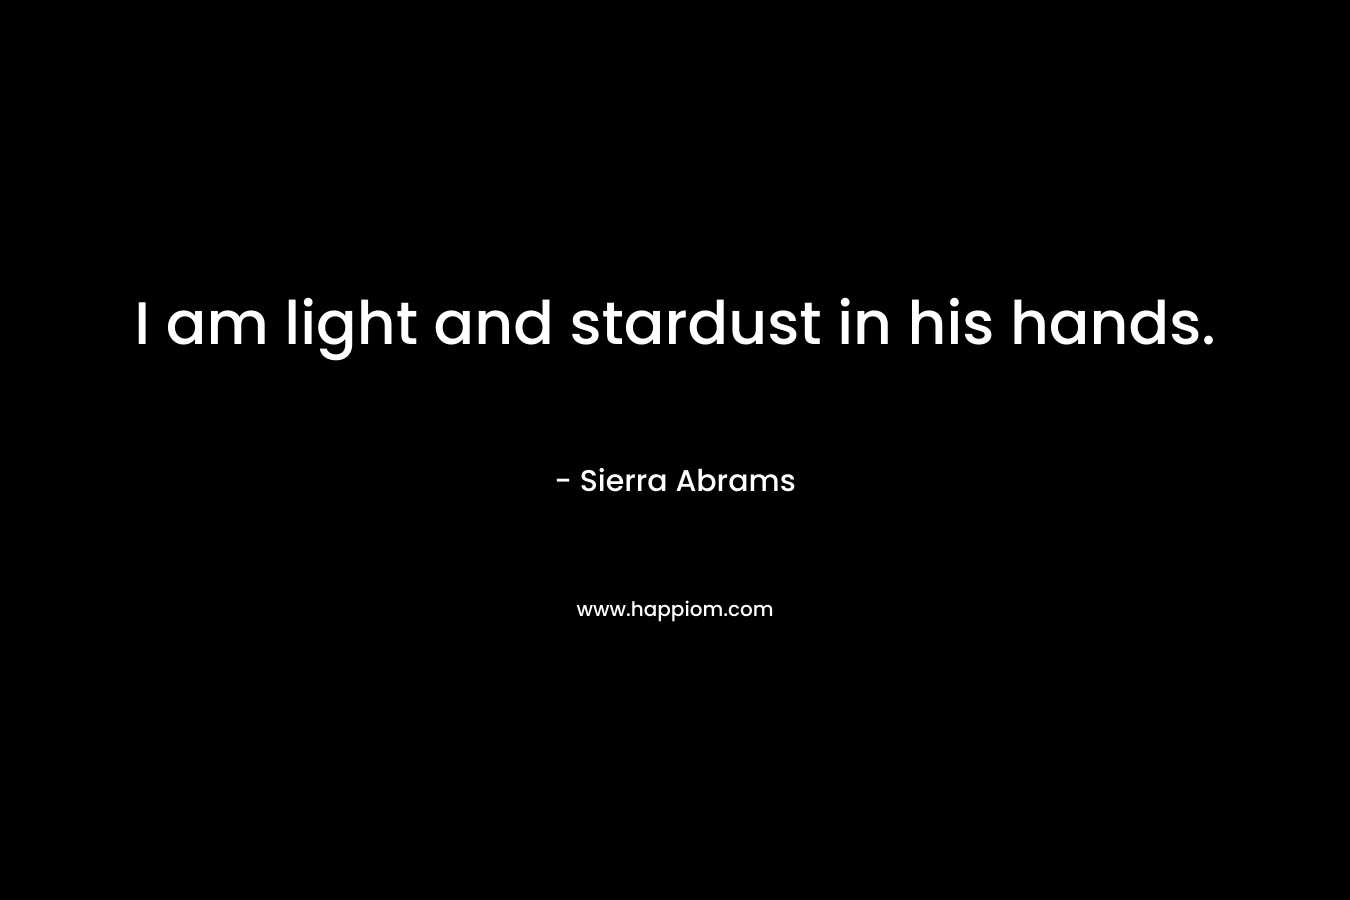 I am light and stardust in his hands. – Sierra Abrams